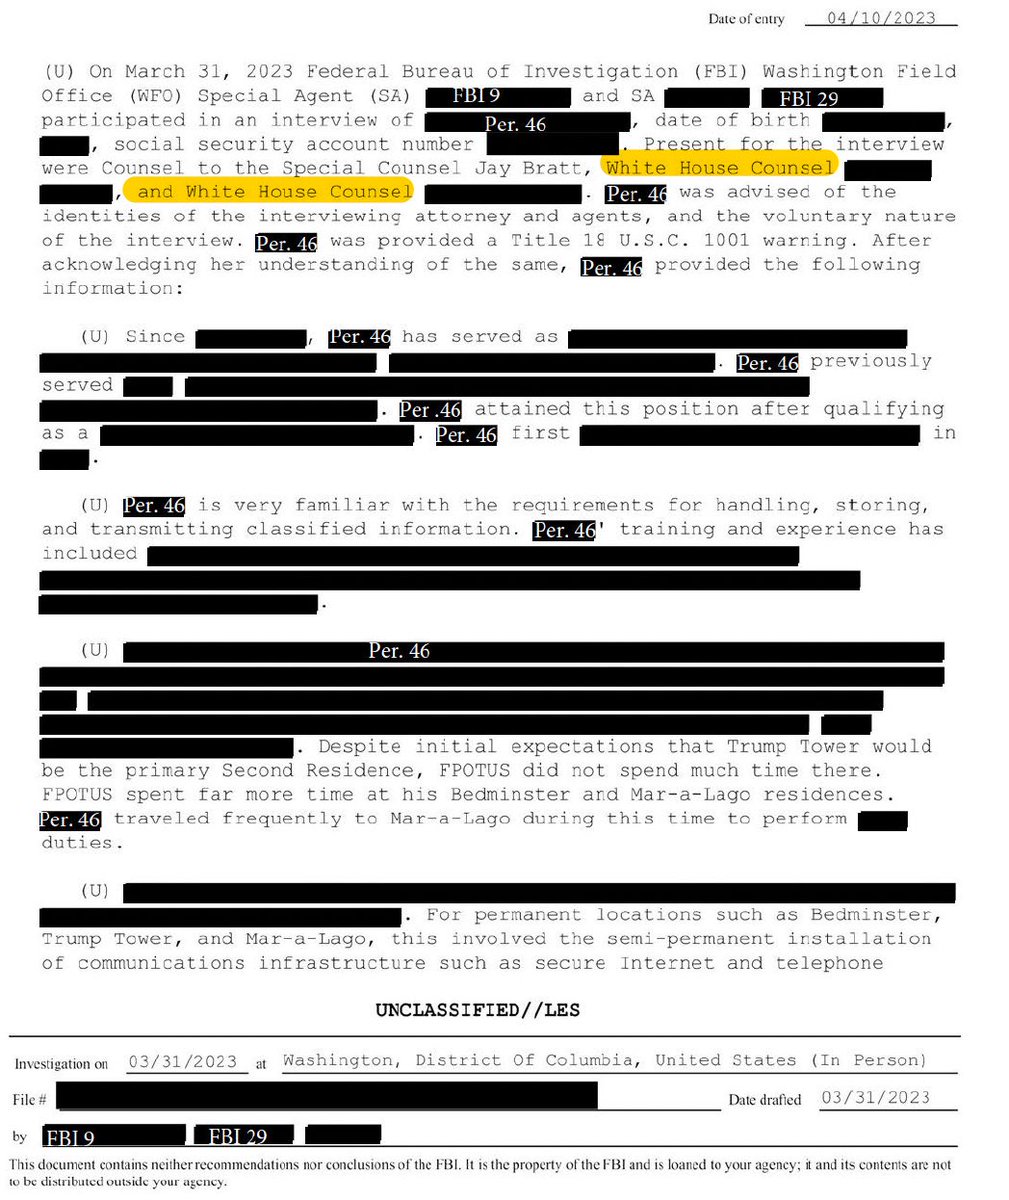 /10 Another document from the FBI reveals that White House Counsel was part of a meeting with the FBI and Special Counsel Jay Bratt.  This is explosive evidence that Biden’s White House Counsel was part of the prosecution team against President Trump.